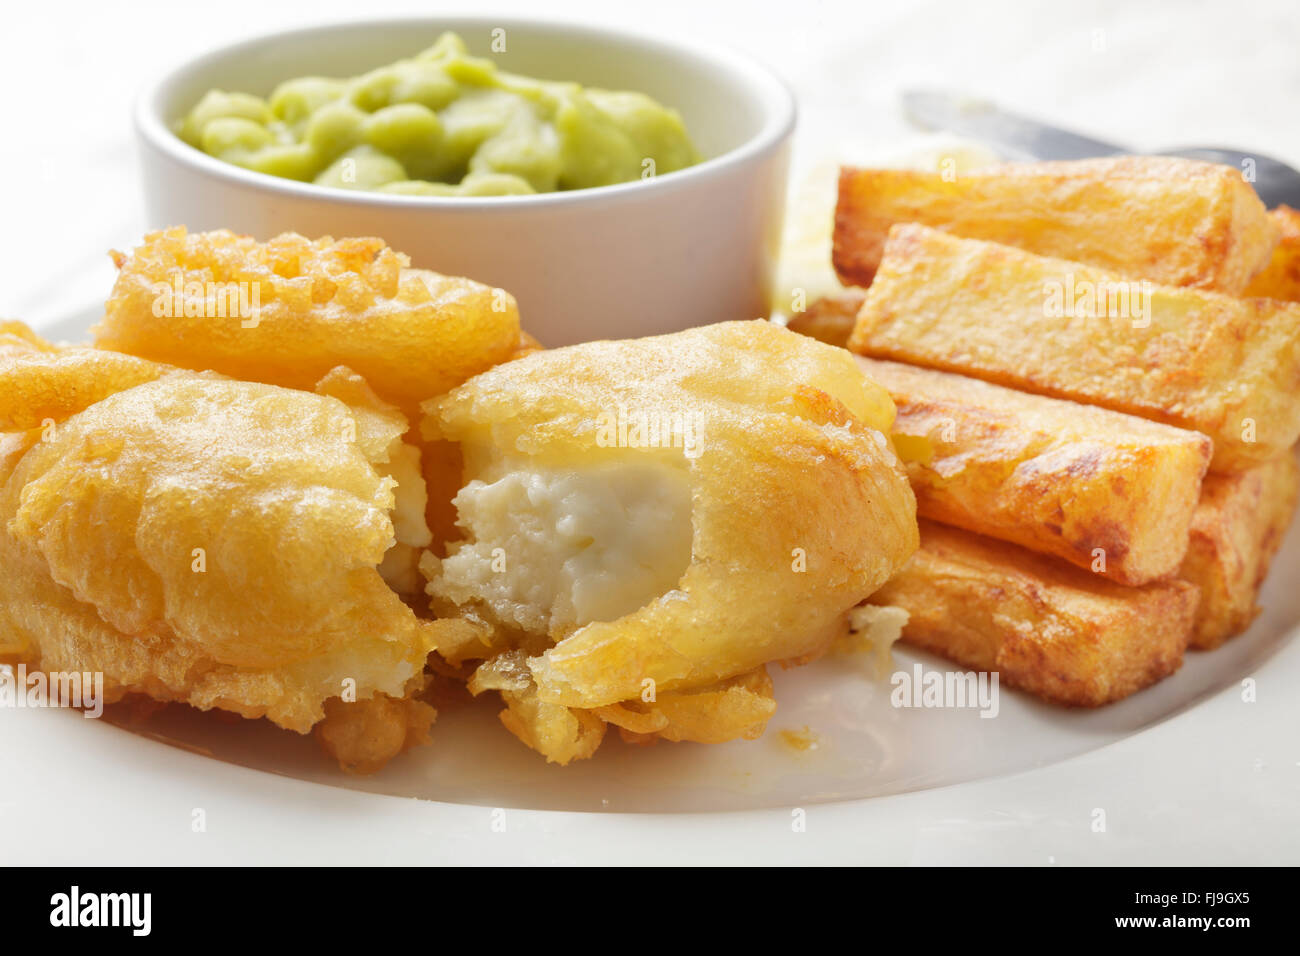 Halloumi battered with chips and mushy peas Stock Photo